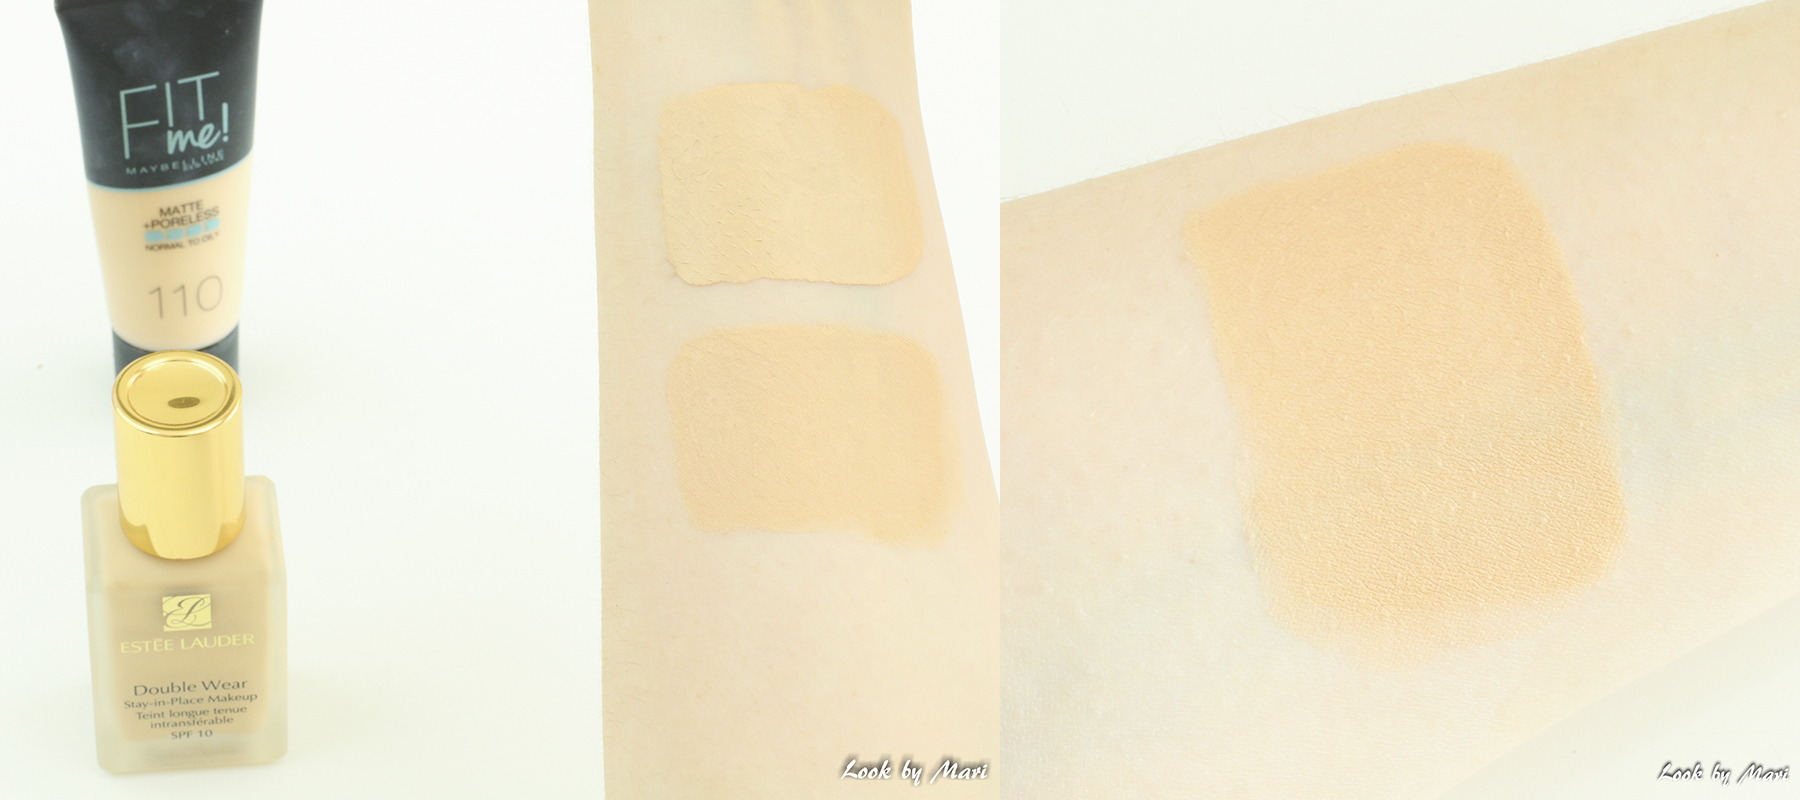 5 Estee lauder 1N1 ivory nude swatches swatch shades colors sävyt värit review kokemuksia